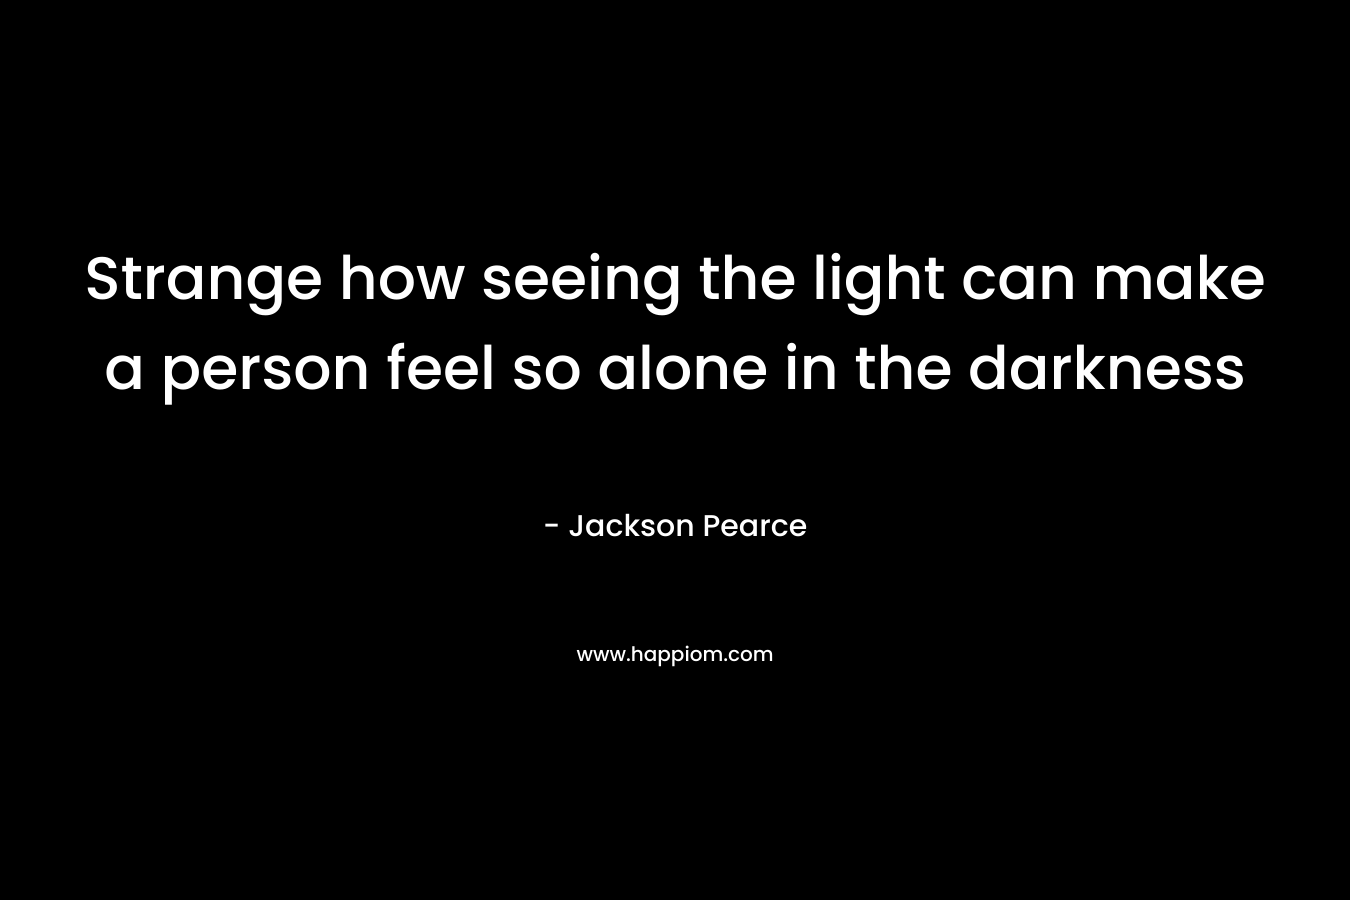 Strange how seeing the light can make a person feel so alone in the darkness – Jackson Pearce